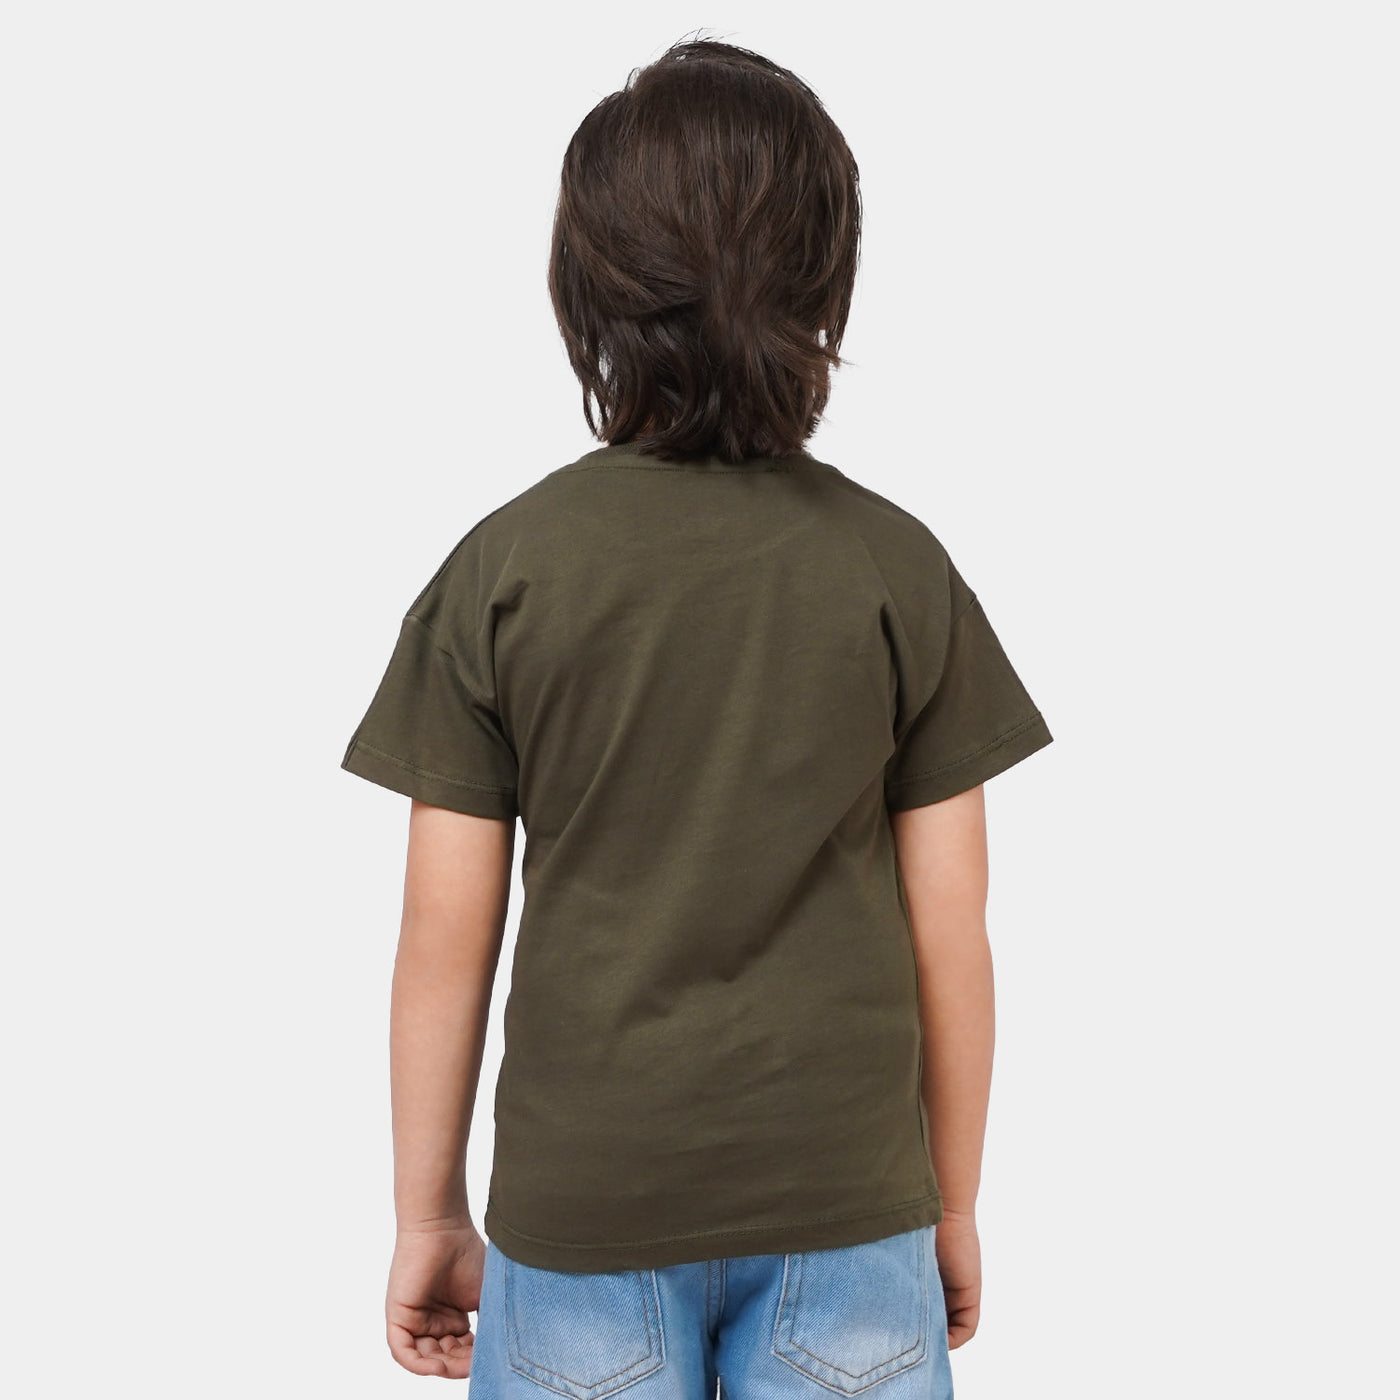 Boys Cotton T-Shirt Realm - Olive Green